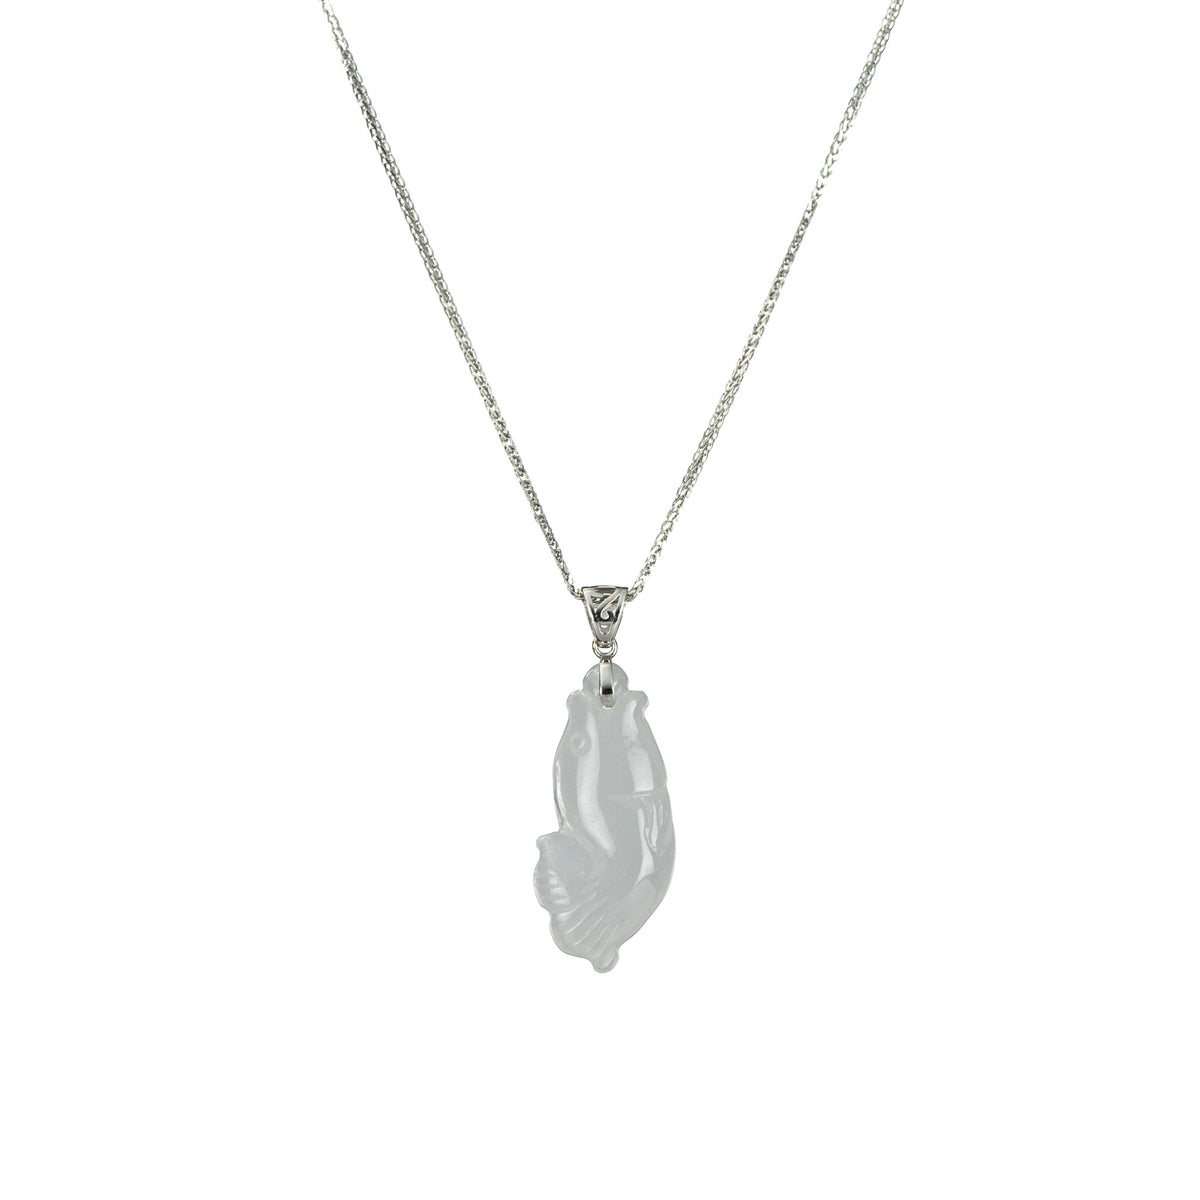 Jade Fish Necklace with 18K White Gold